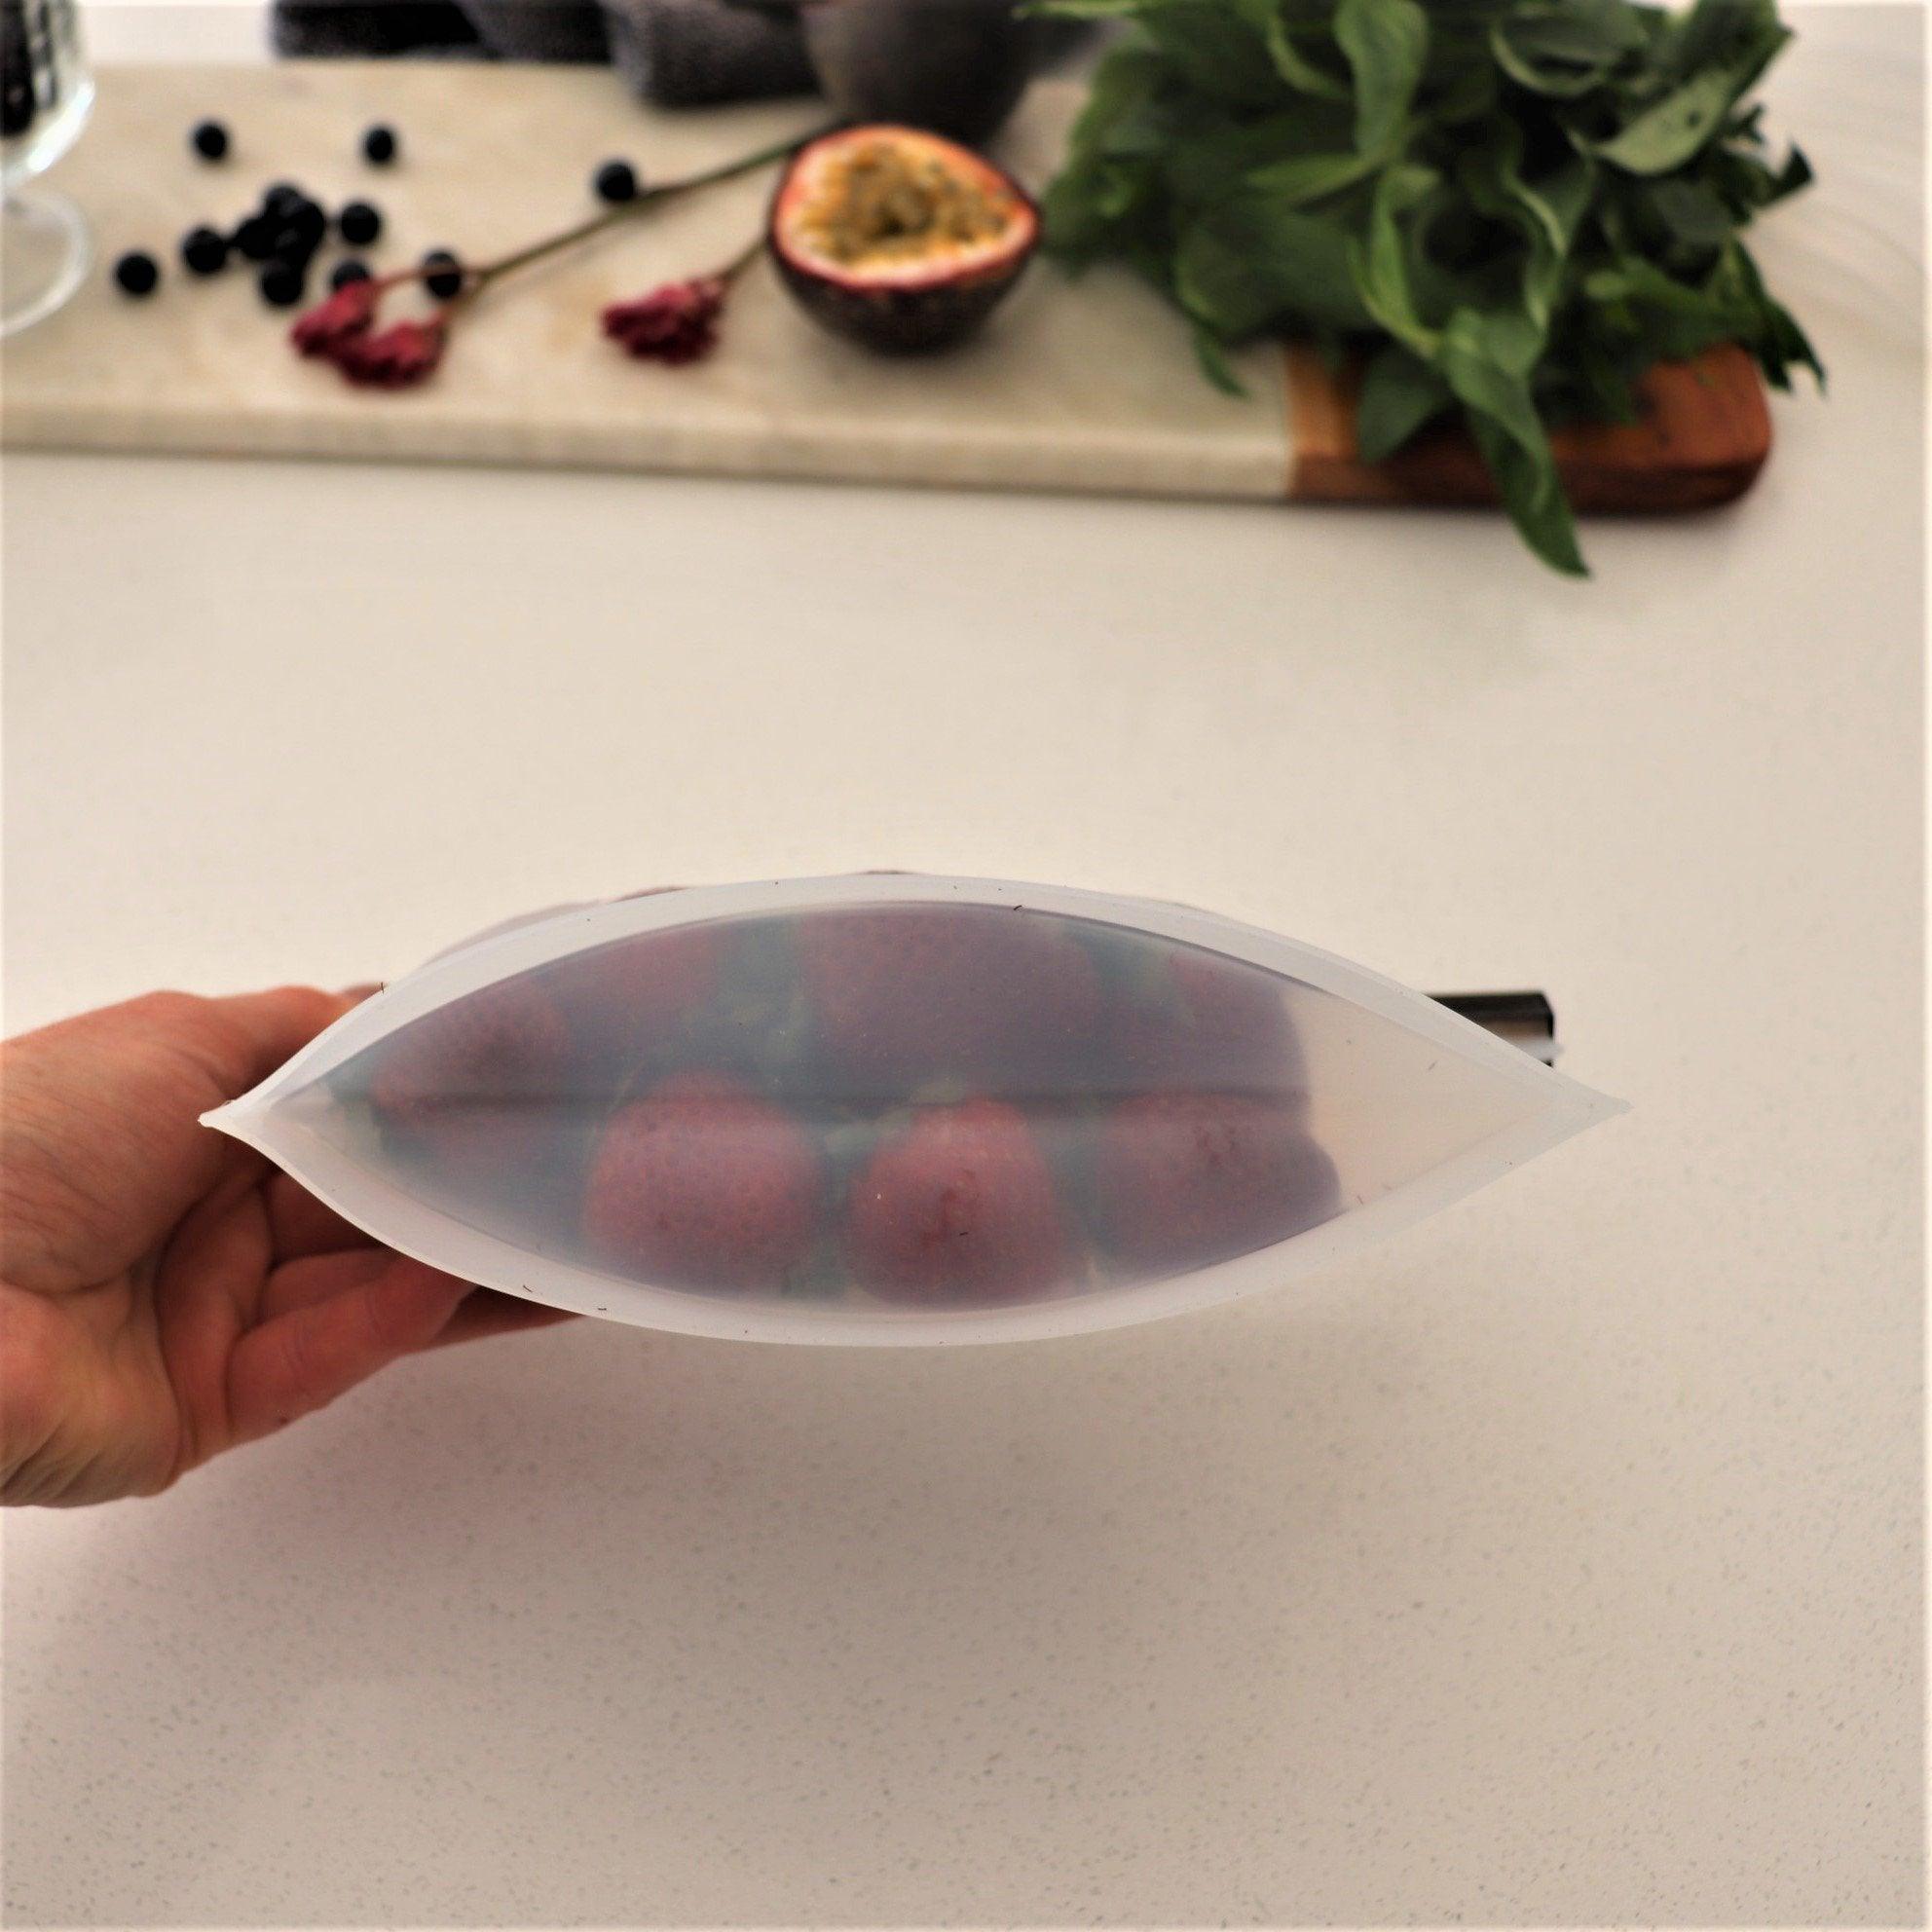 500mL - Reusable Food Grade Silicone Zip Lock Food PouchSustainable Kitchen - Us and the Earth